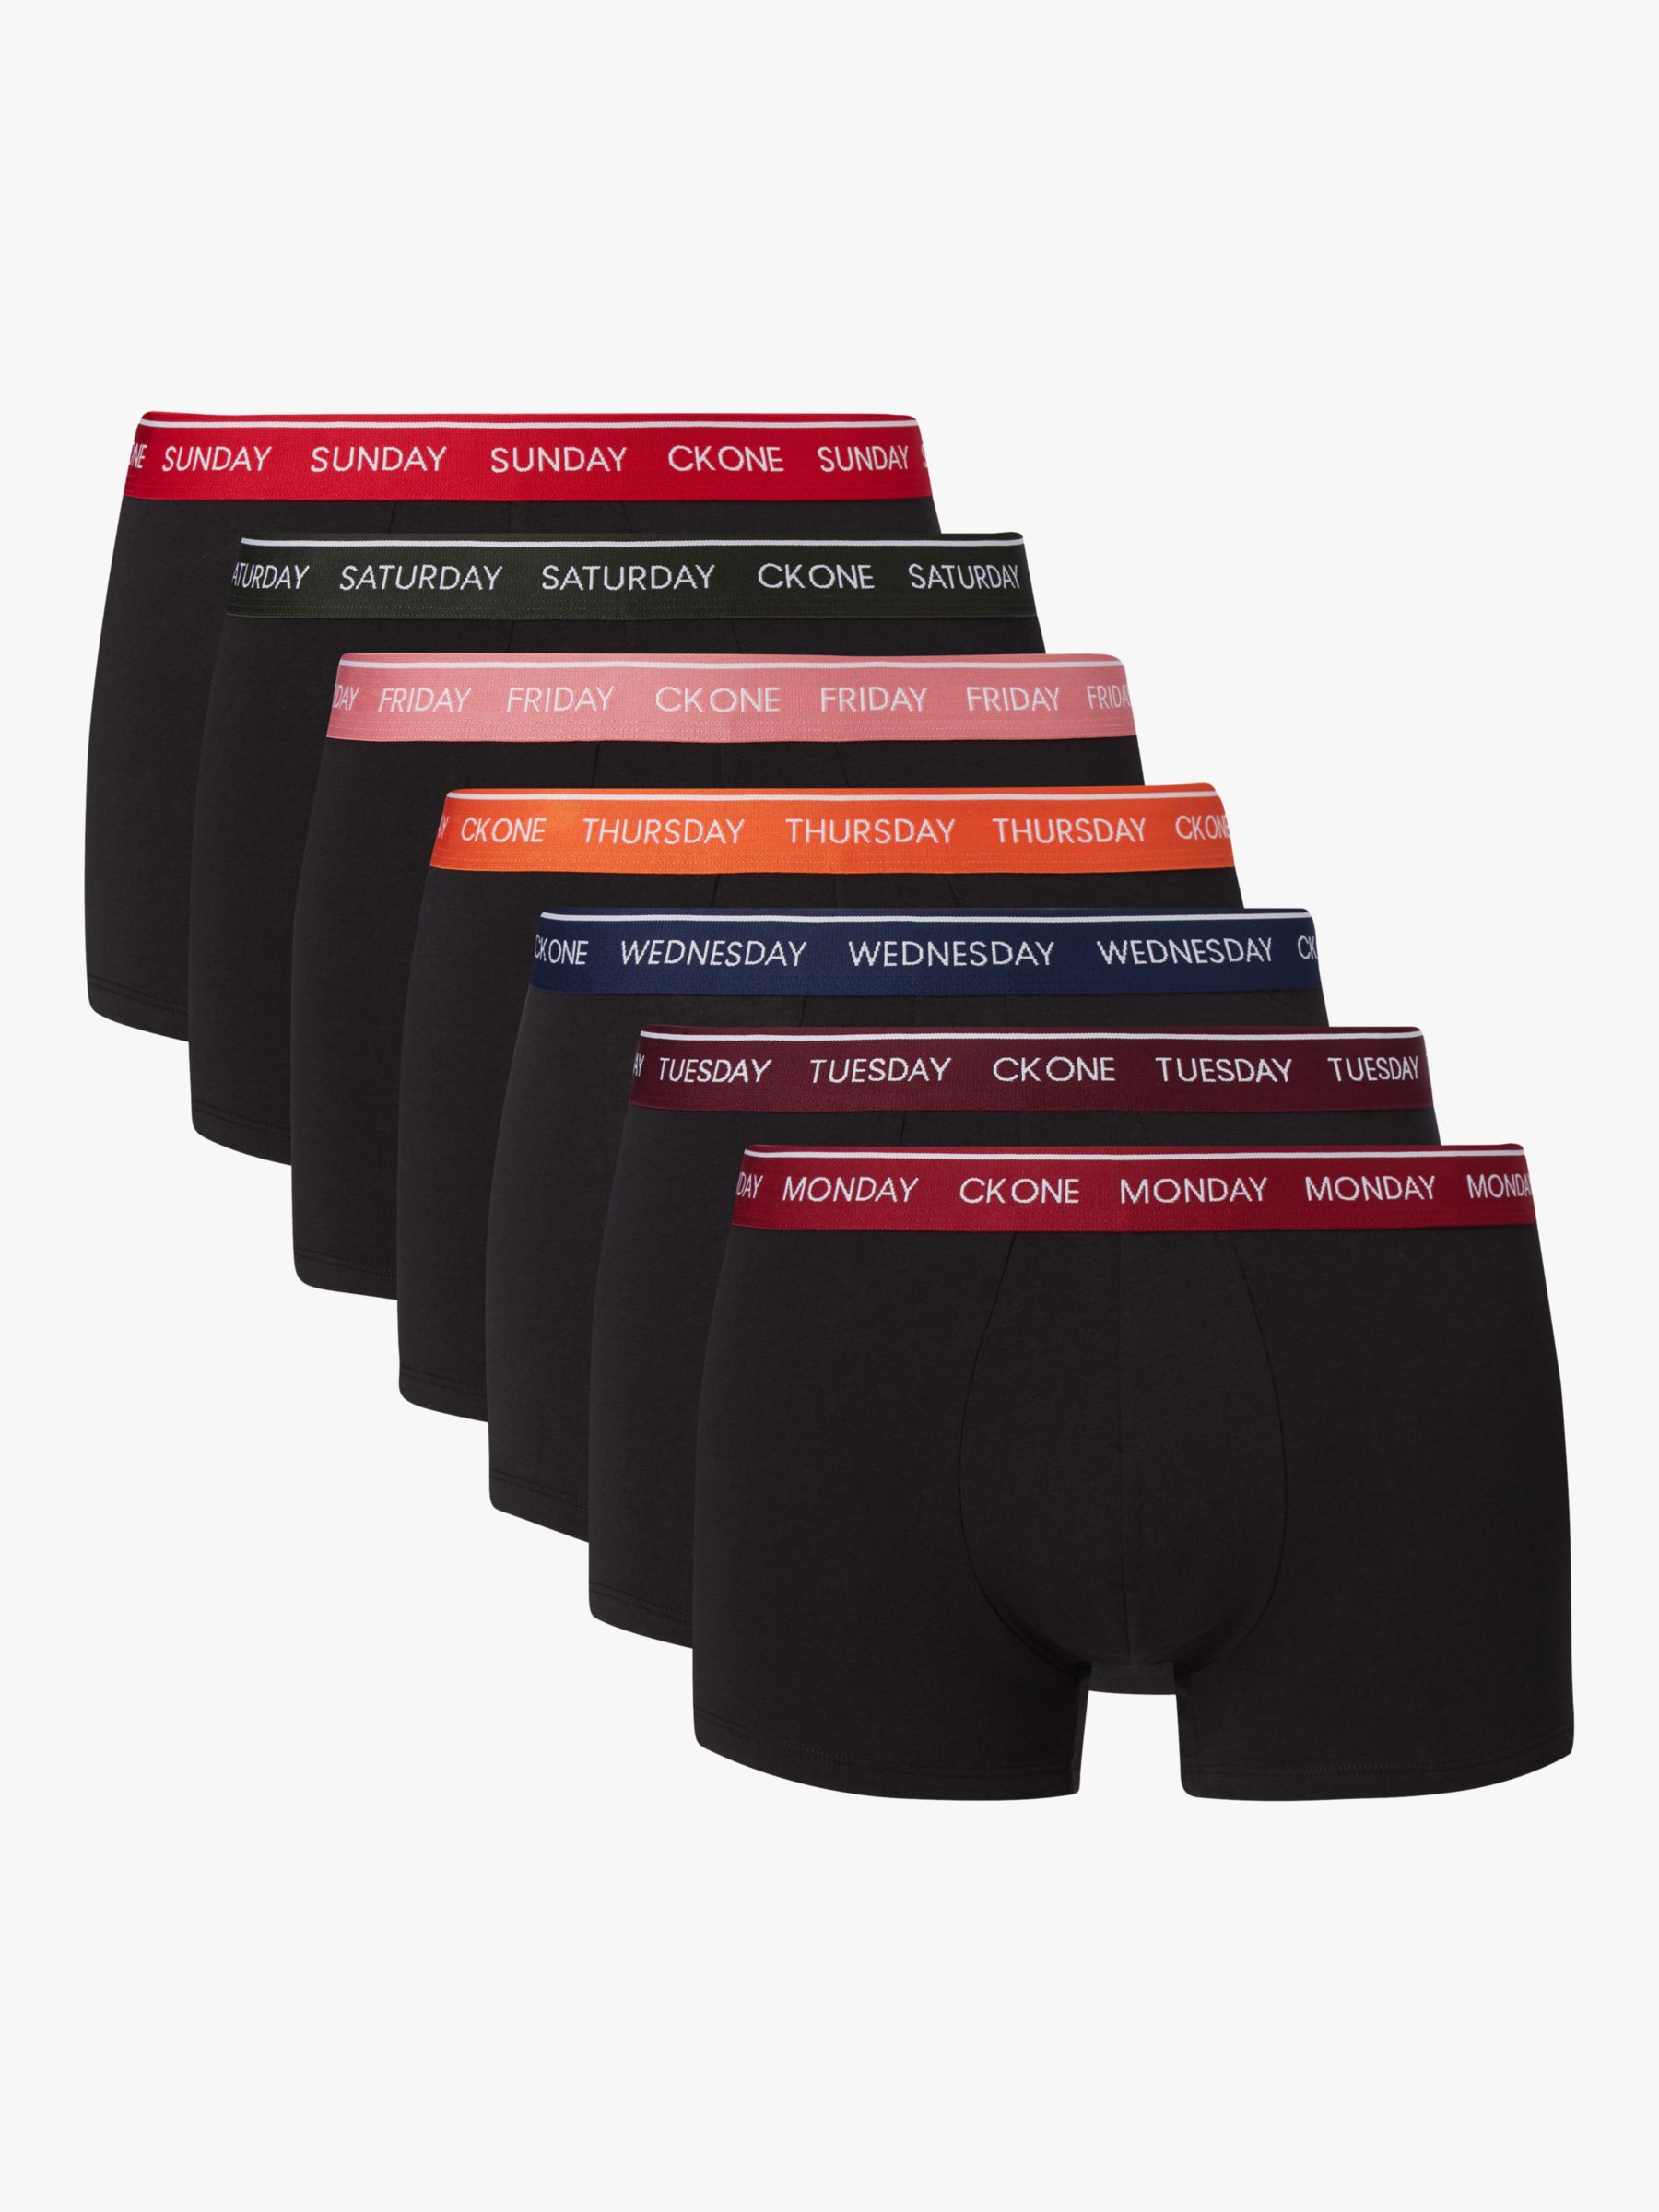 Calvin Klein Days of the Week Contrast Waistband Trunks, Pack of 7, Black